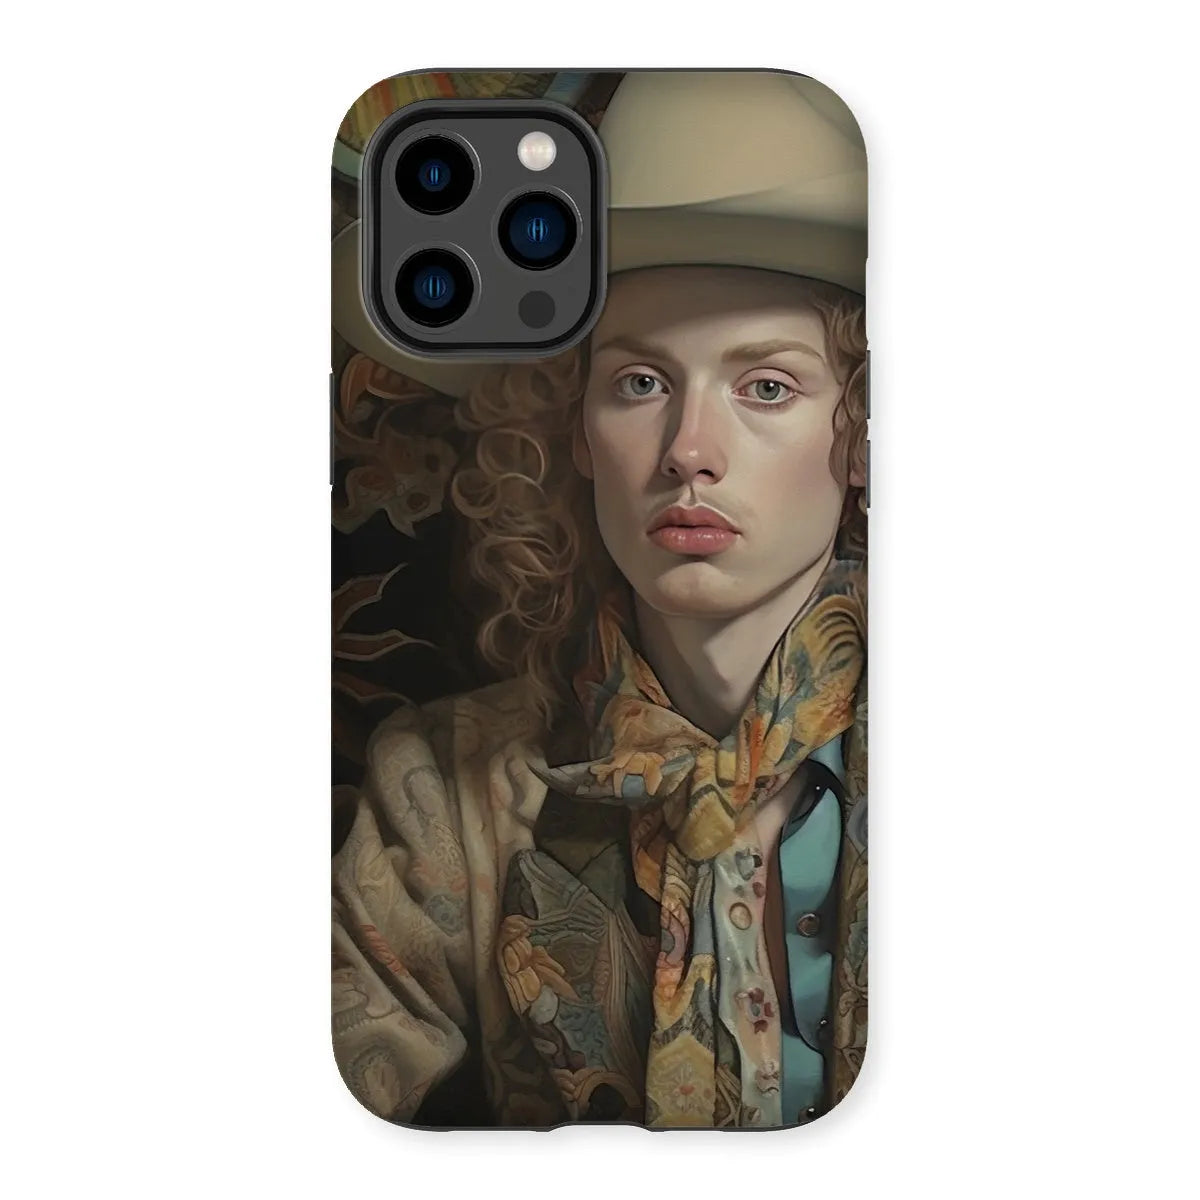 Ollie The Transgender Cowboy - F2m Dandy Outlaw Phone Case - Iphone 14 Pro Max / Matte - Mobile Phone Cases - Aesthetic